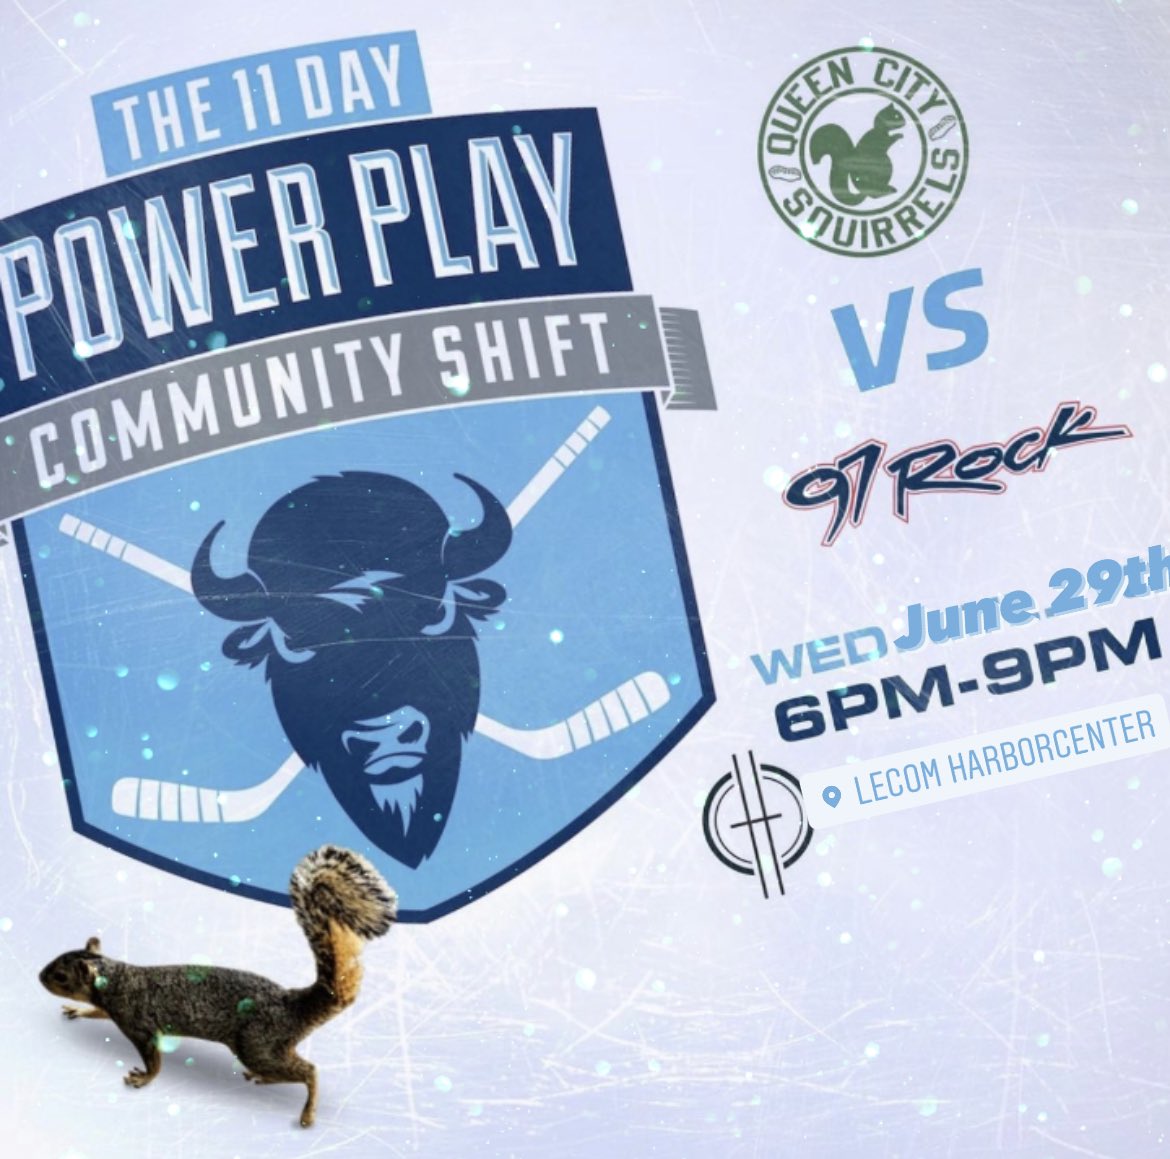 Don’t forget everyone!! Wednesday night one of the biggest Buffalo rivalries is back when the @QCSquirrels face off against @DJJickster & @97RockBuffalo at @Harborctr during The @11DayPowerPlay from 6pm - 9pm. Come down and cheer us on!